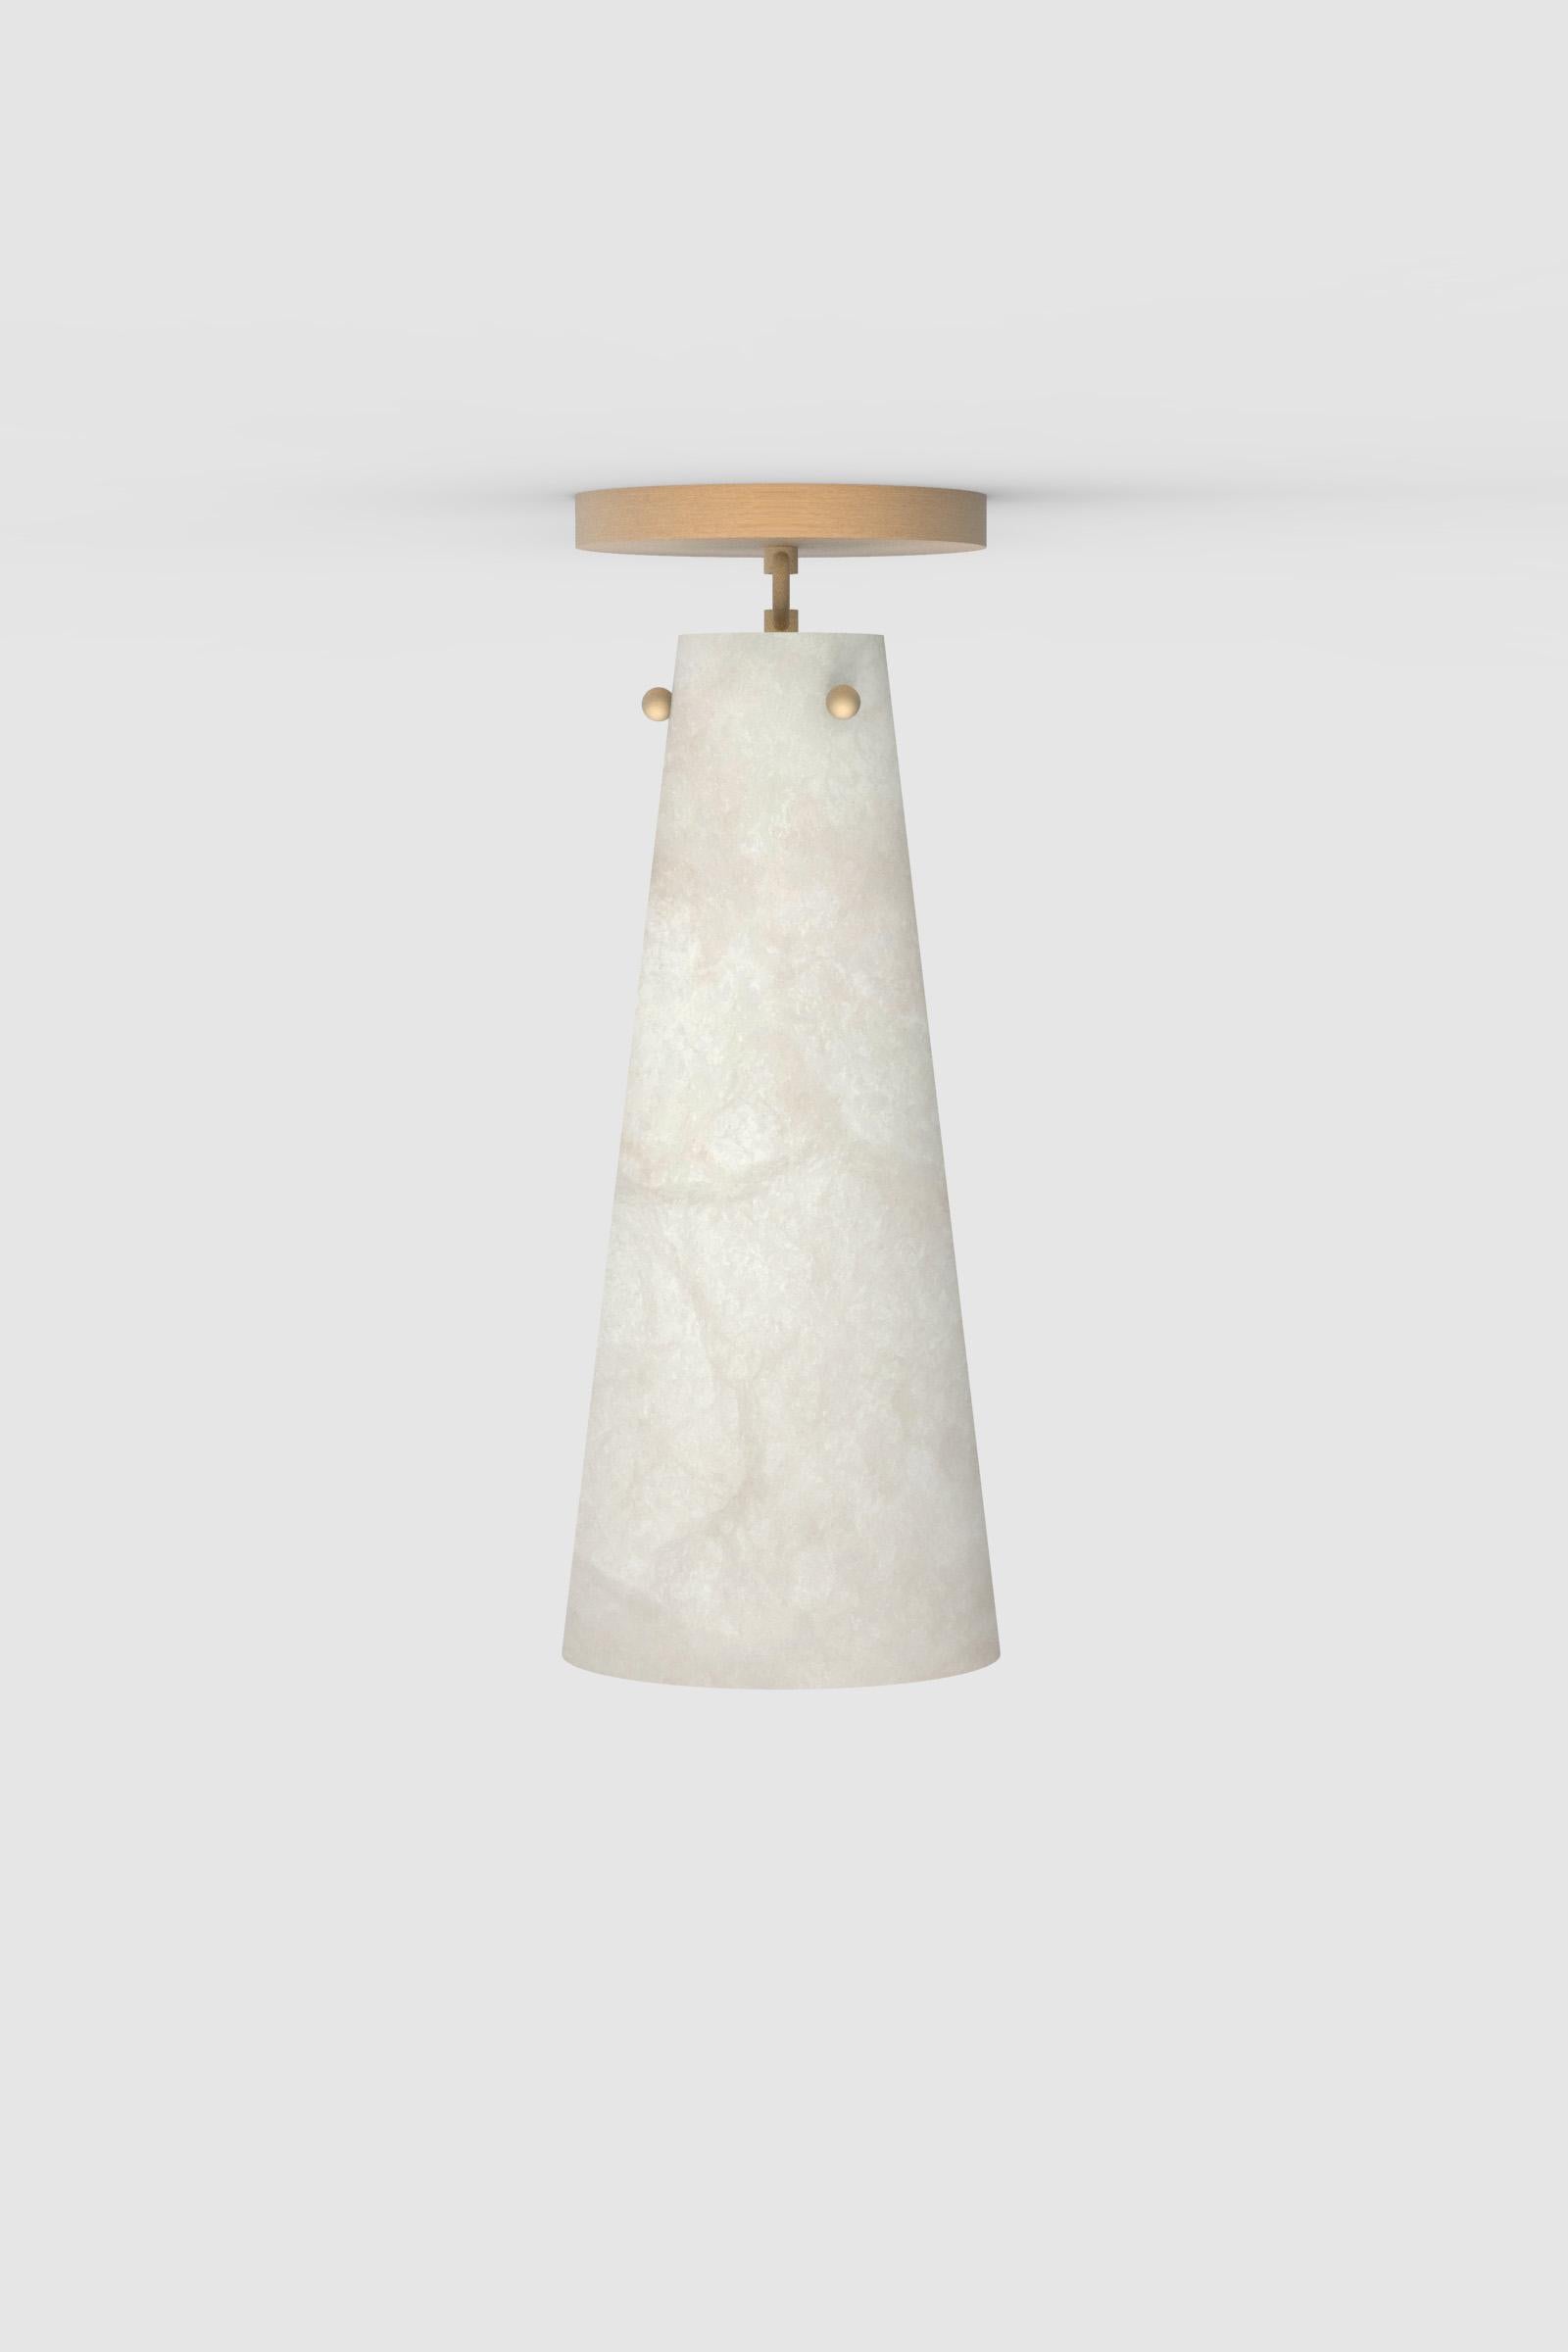 Orphan Work 202A flush mount BB, 2021
Shown in alabaster with brushed brass
Available in brushed brass and blackened brass
Measures: 17” H x 6 1/2” W x 6” D
UL approved
Holds (1) 40W candelabra bulb
must use LED bulb 

Orphan Work is 